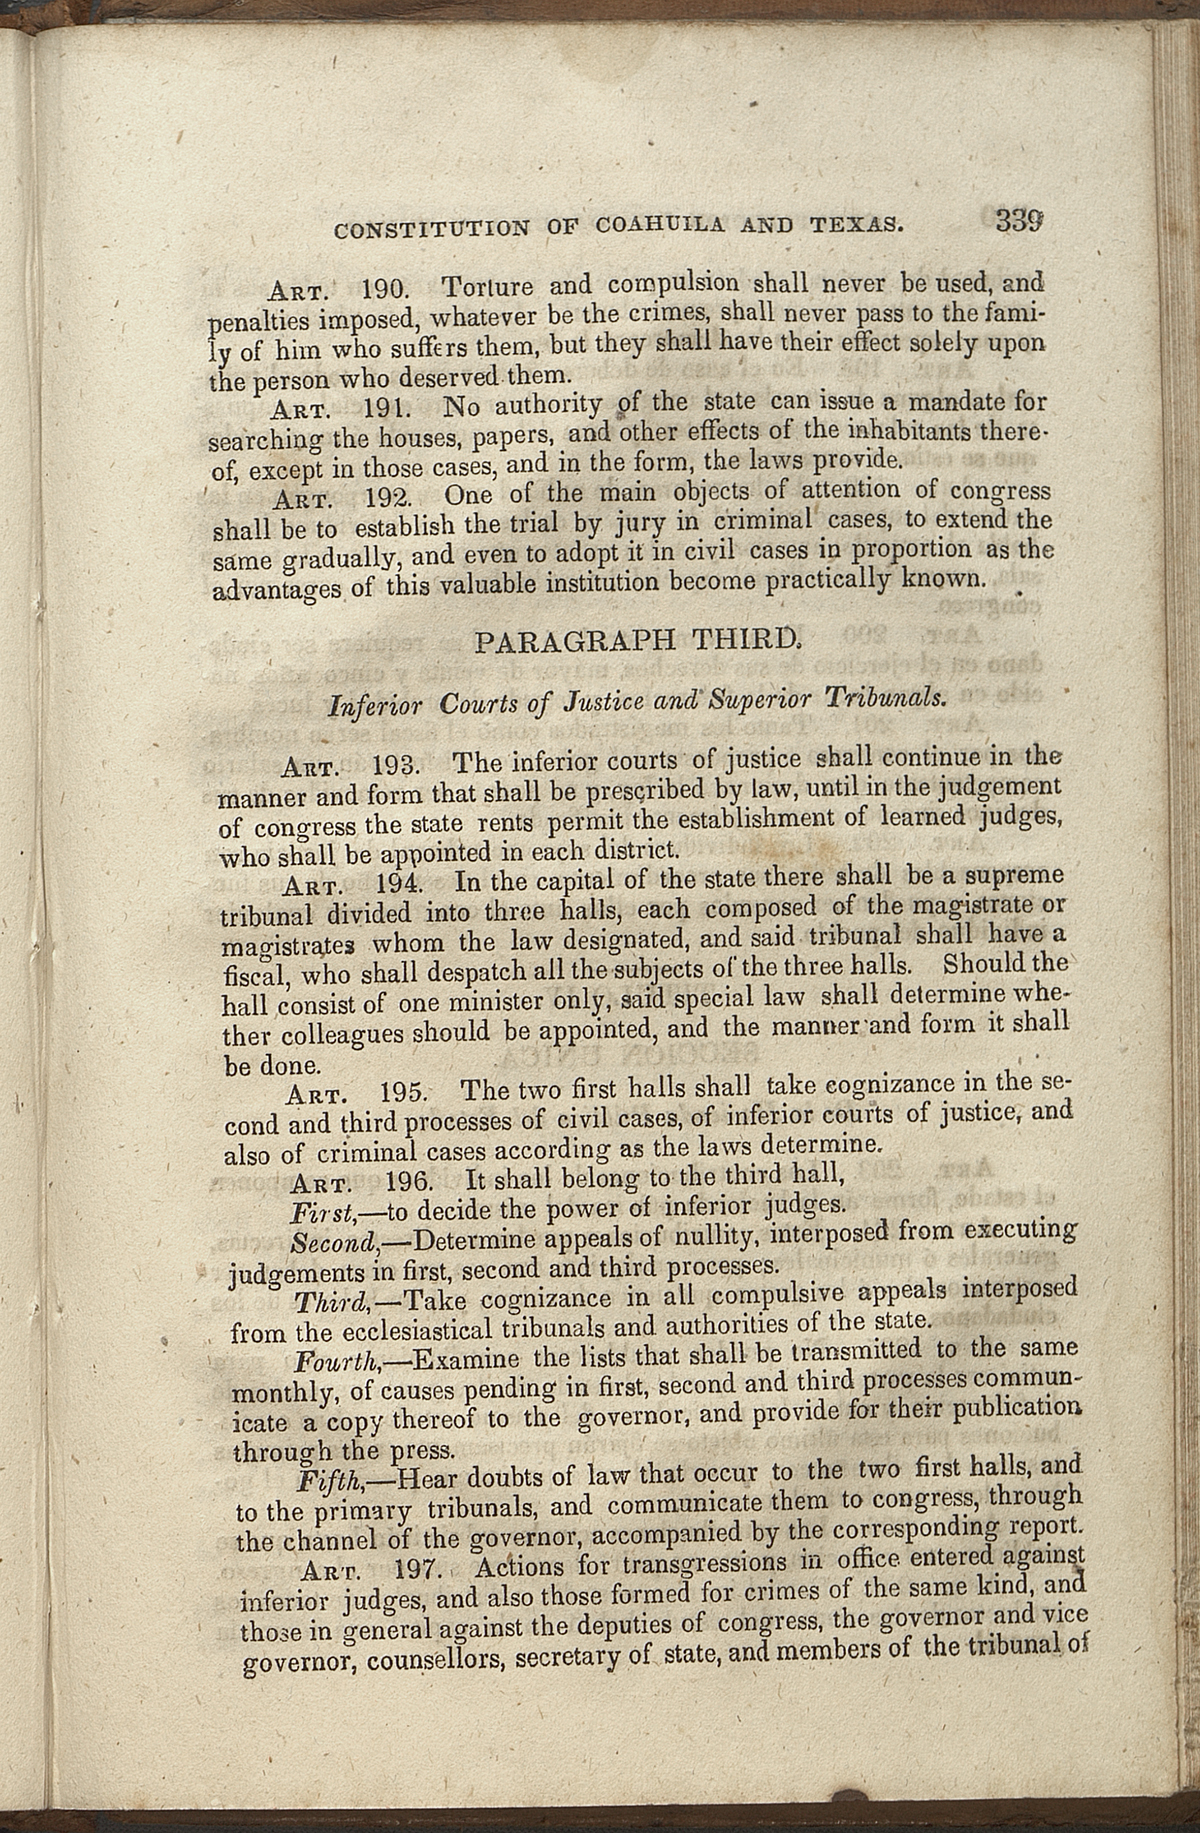 Title III, Sole Section, Articles 190-197